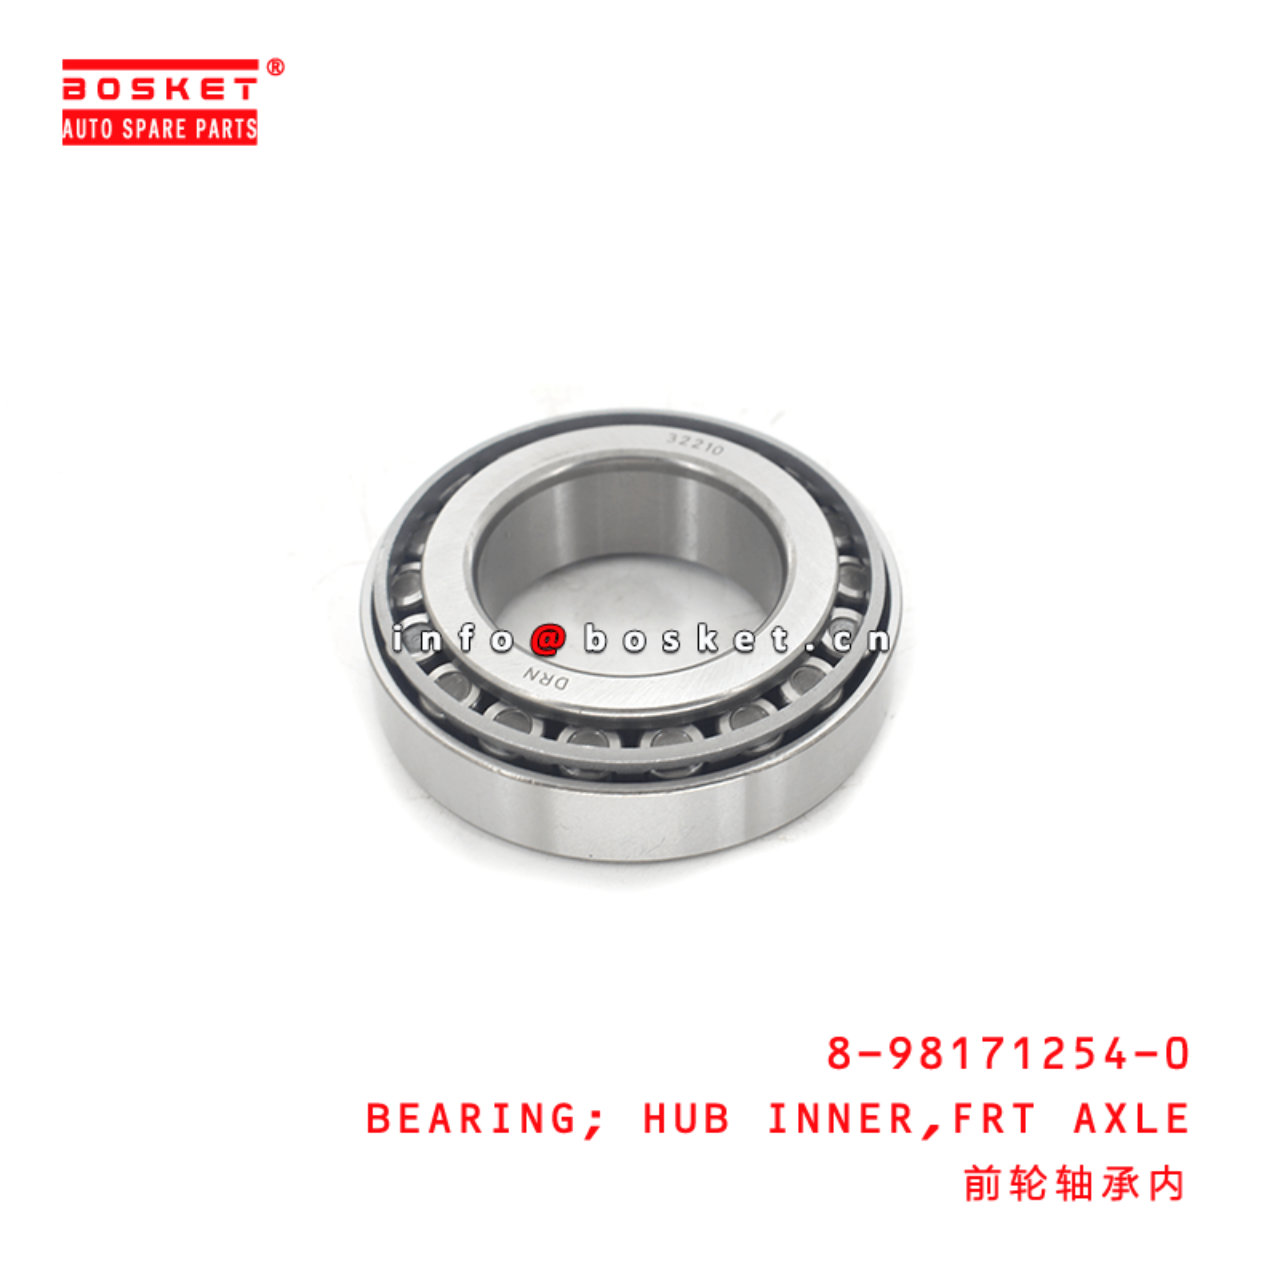 8-98171254-0 Front Axle Hub Inner Bearing 8981712540 Suitable for ISUZU VC46 4HK1